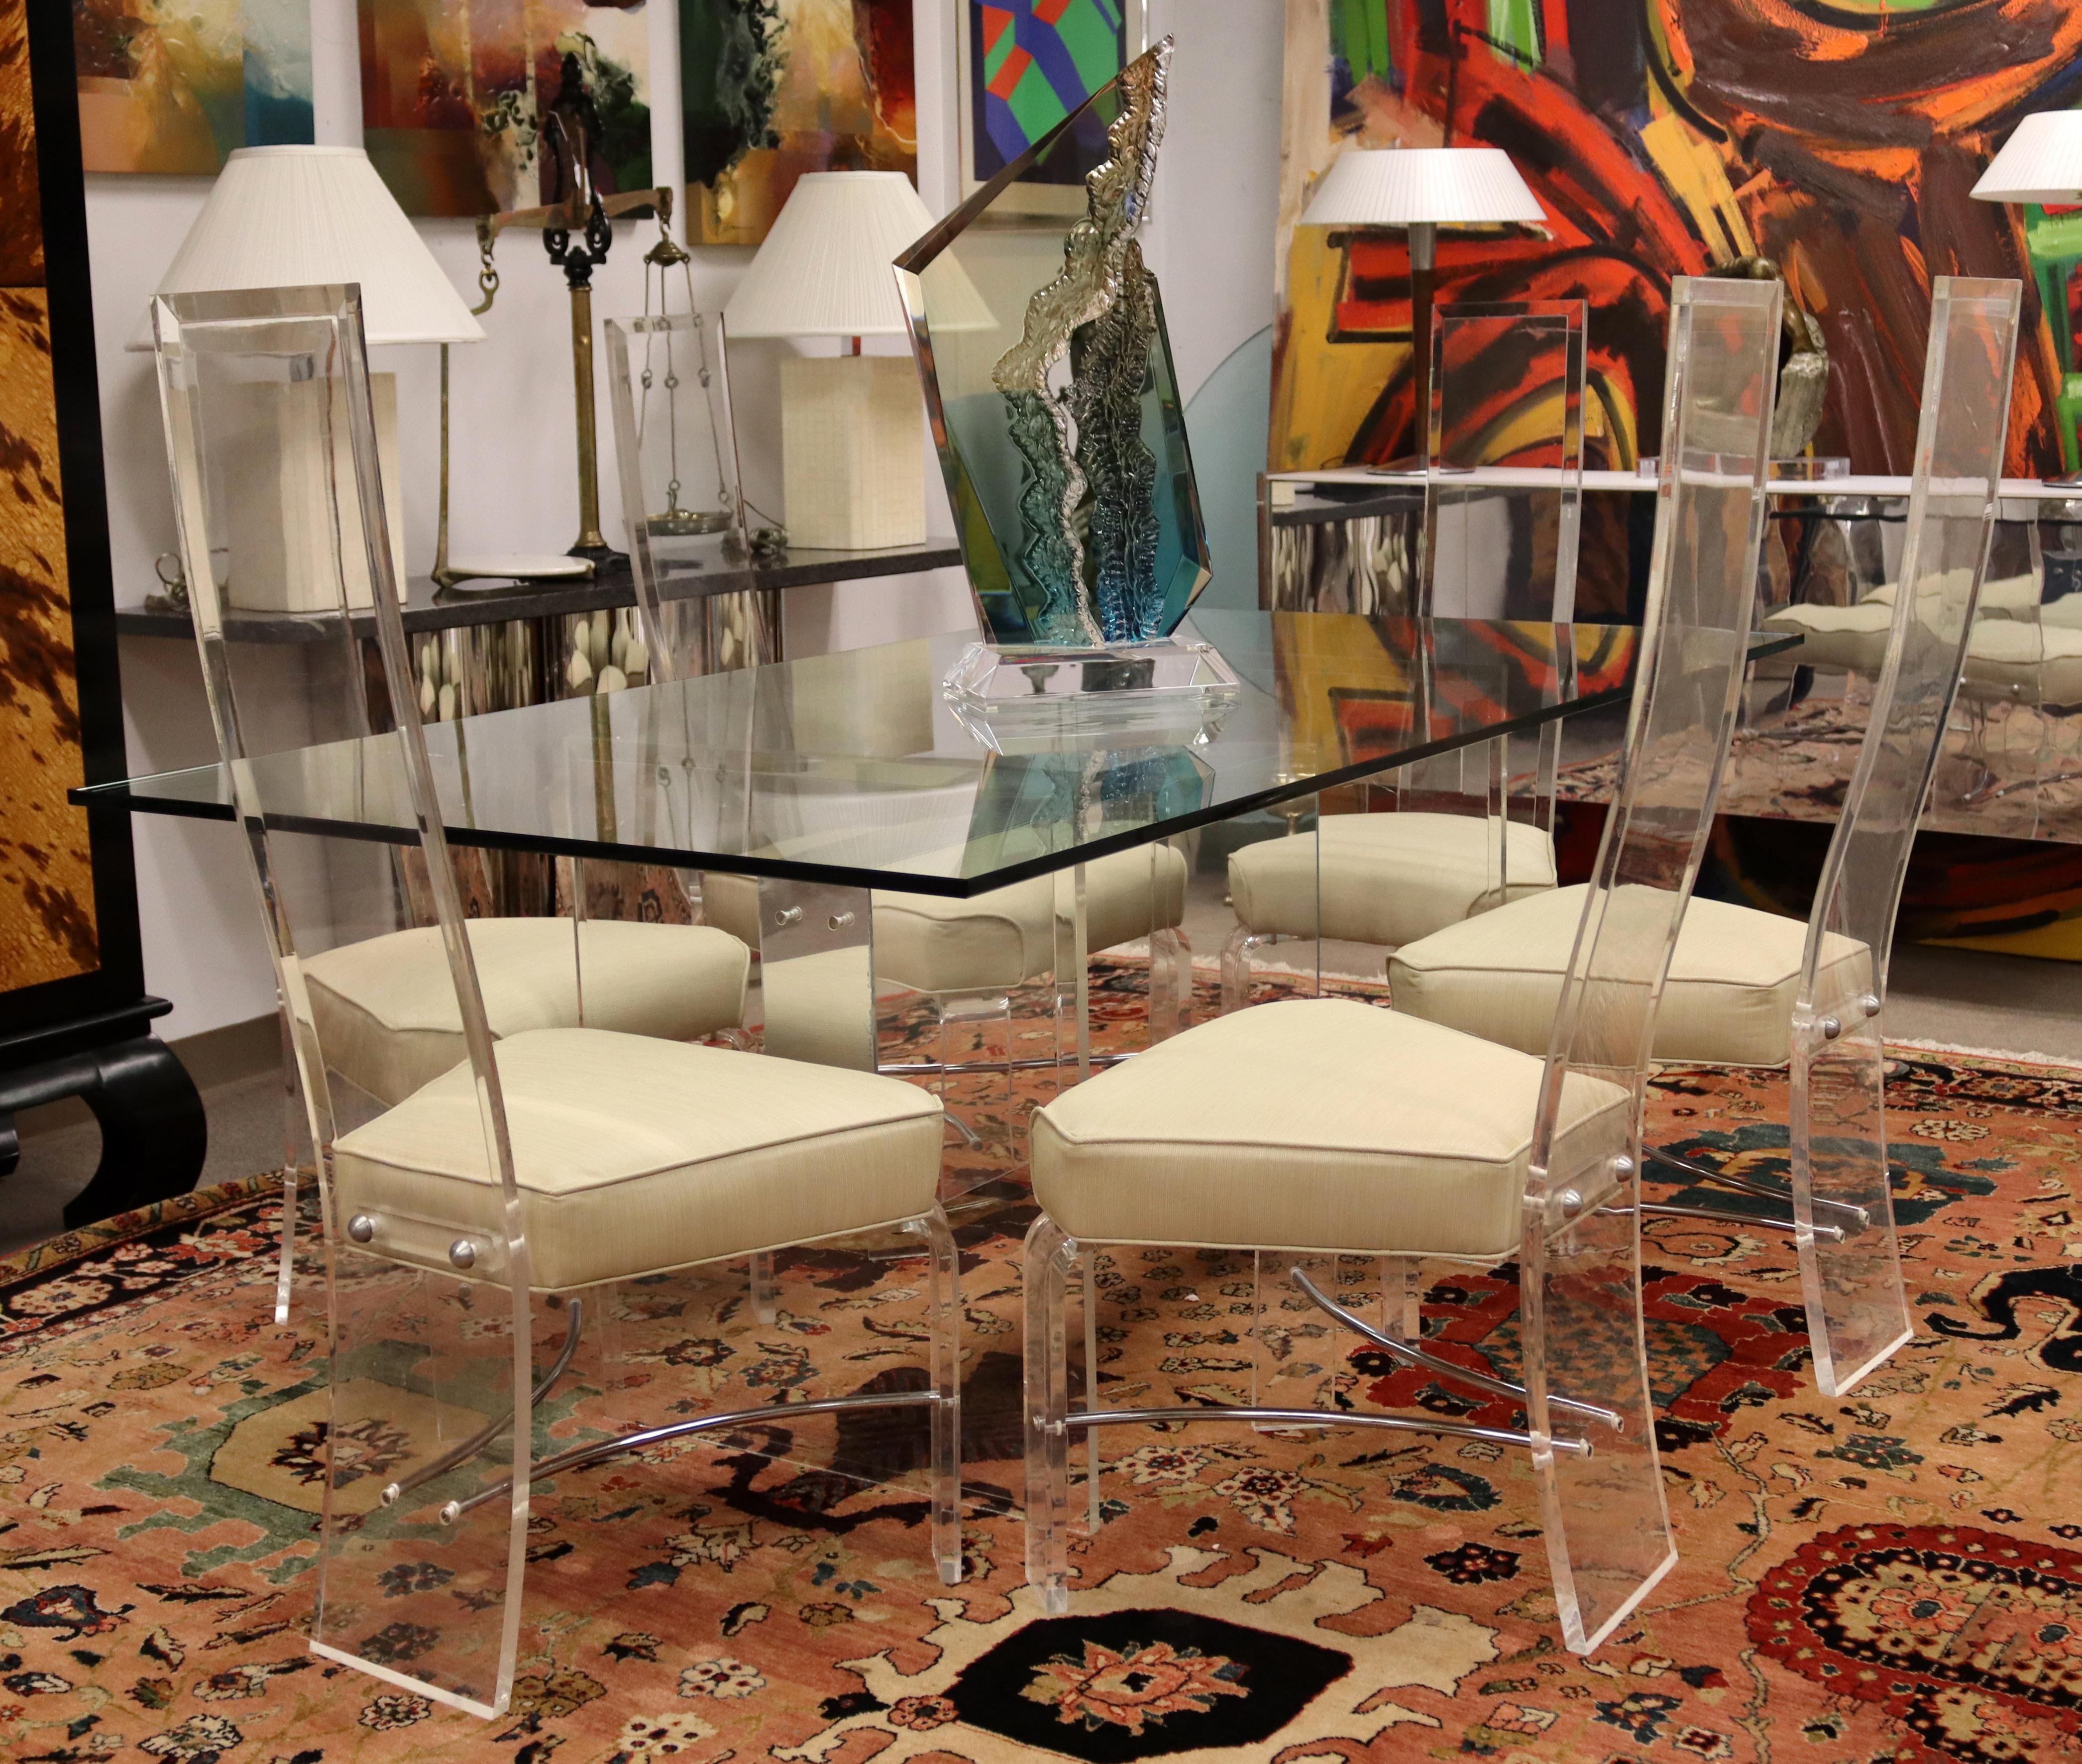 For your consideration is a minimalist dining set, including a lucite and chrome table, with a set of six high back chairs, circa the 1980s. In very good vintage condition. The dimensions of the table are 72